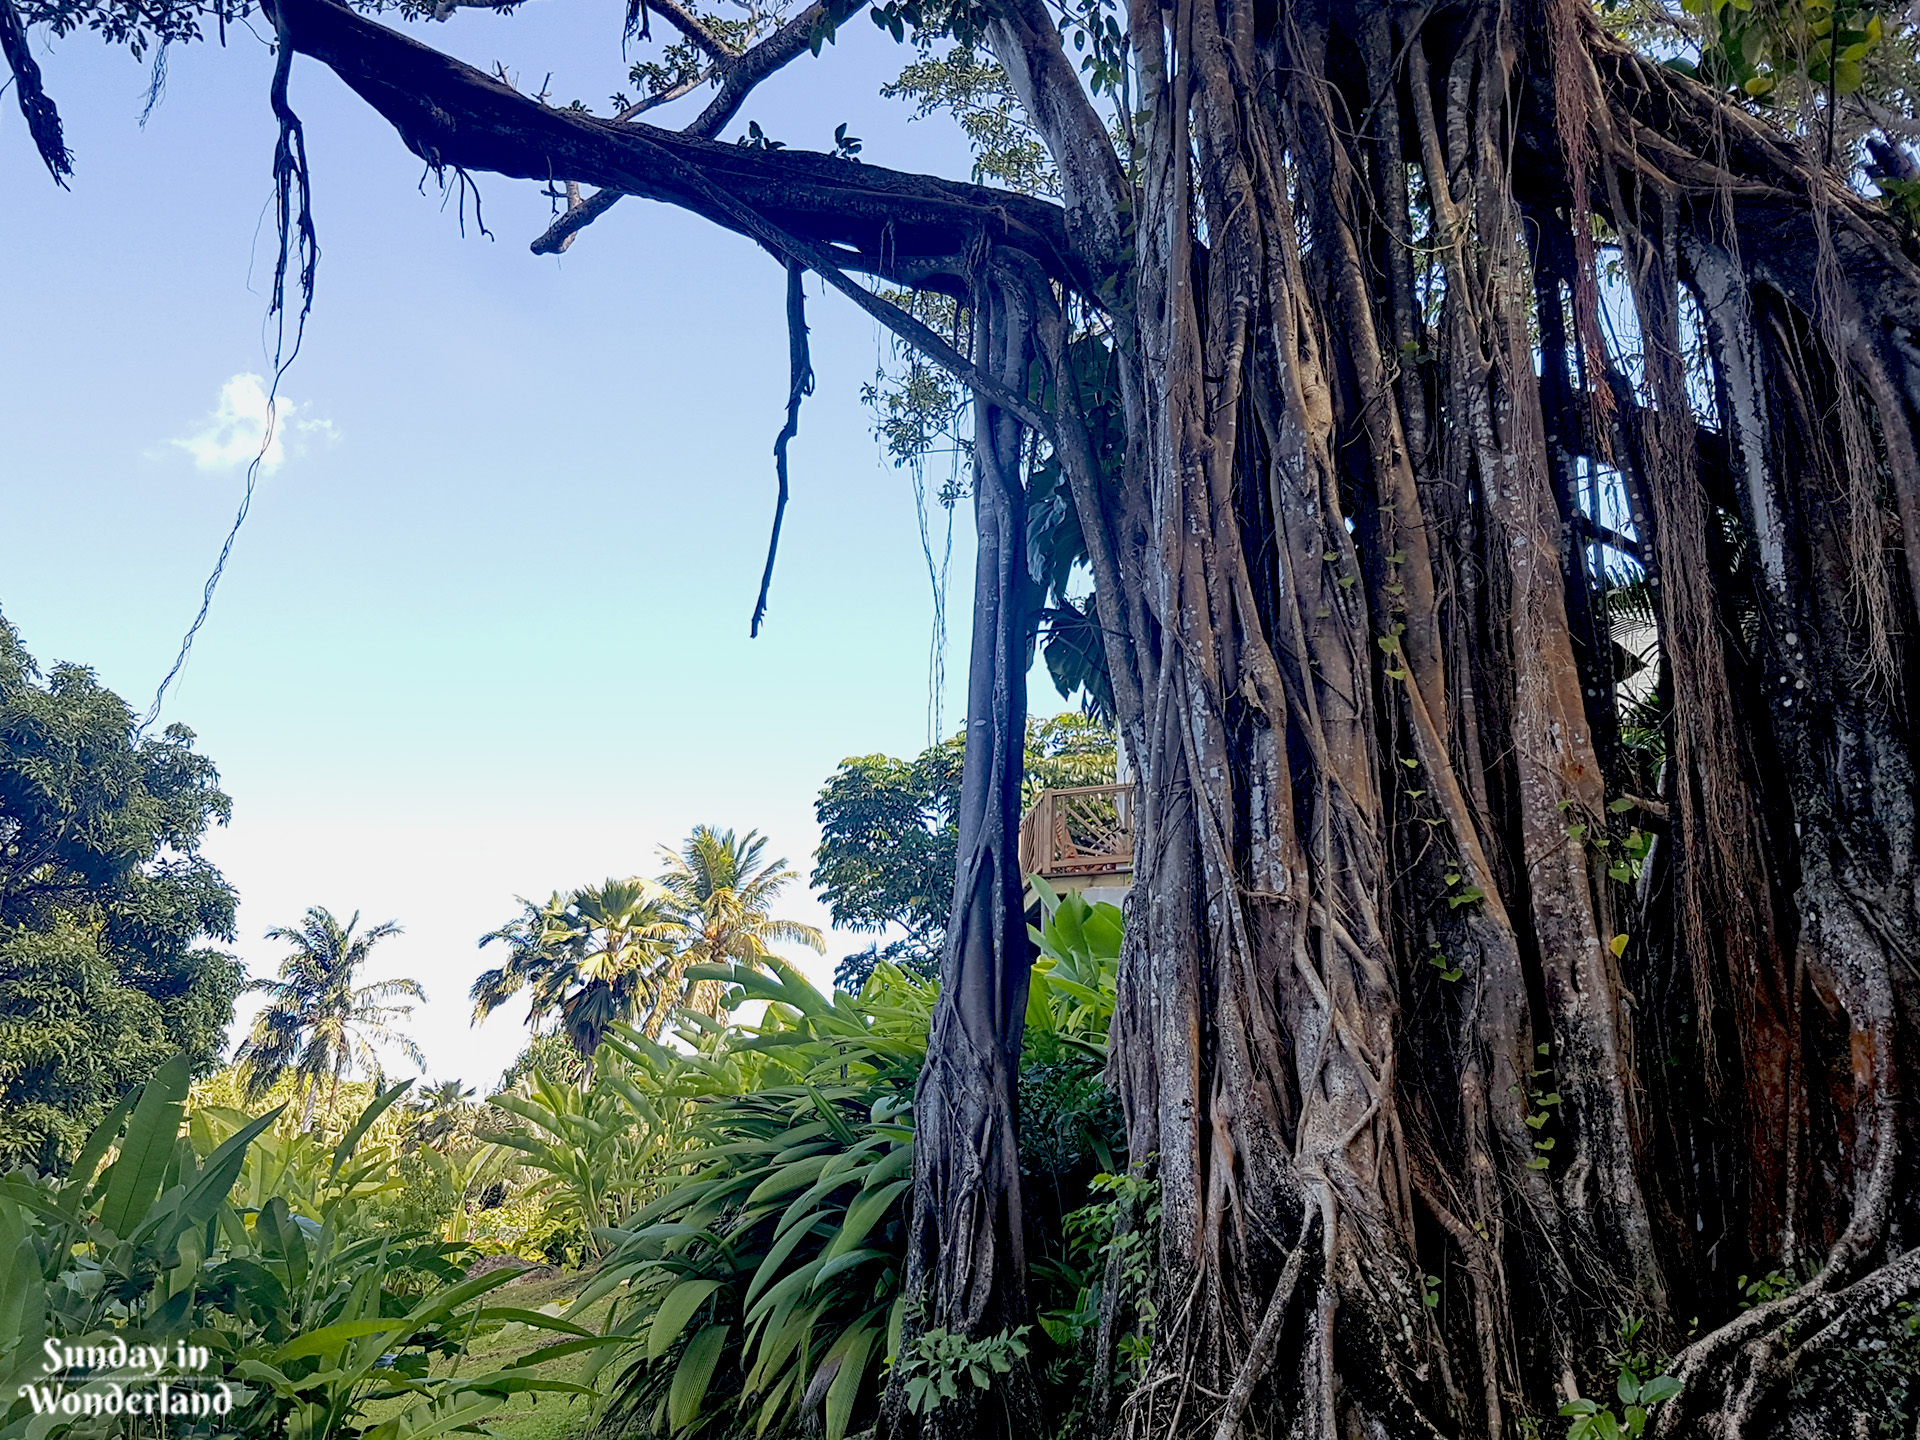 A strange shaped tree with long roots in Botanical Garden in Deshaies in Guadeloupe - Sunday in Wonderland Blog